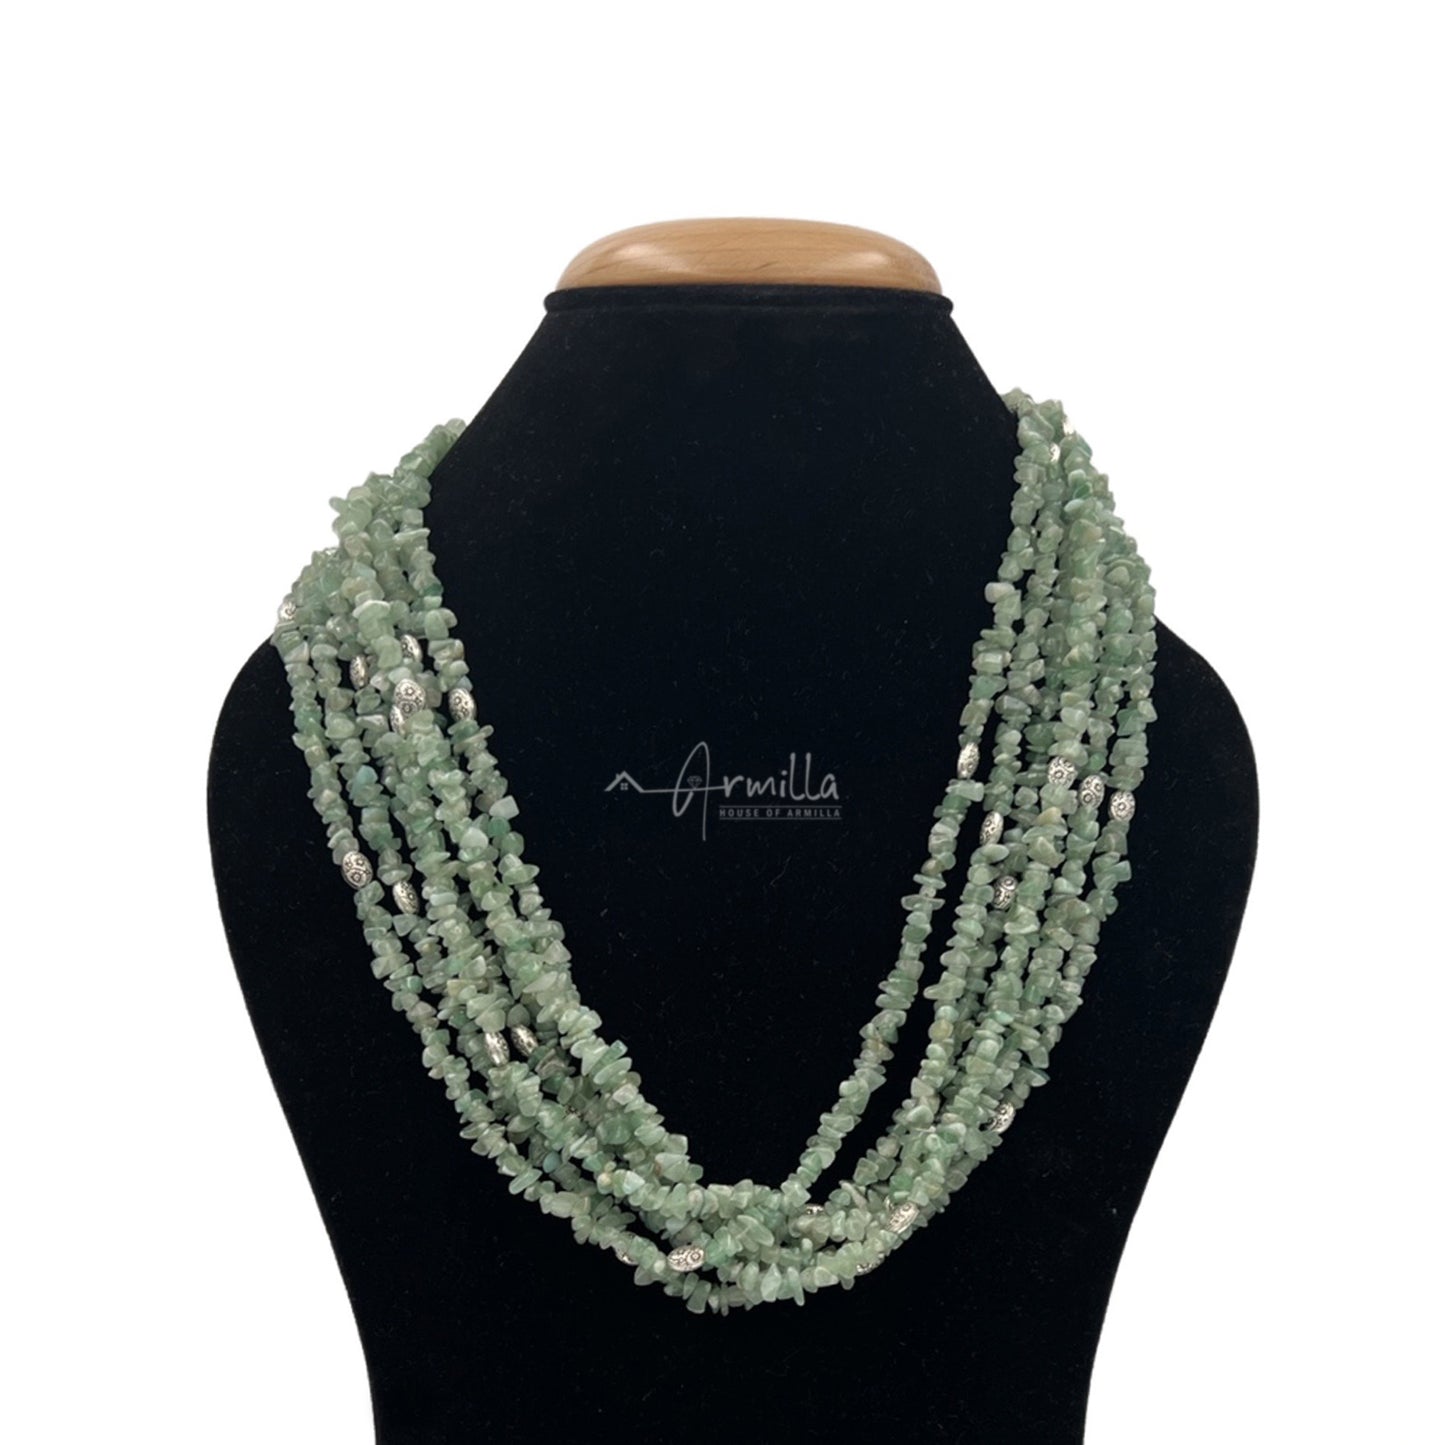 Multi Strand High Gloss Beaded Necklace with Earrings